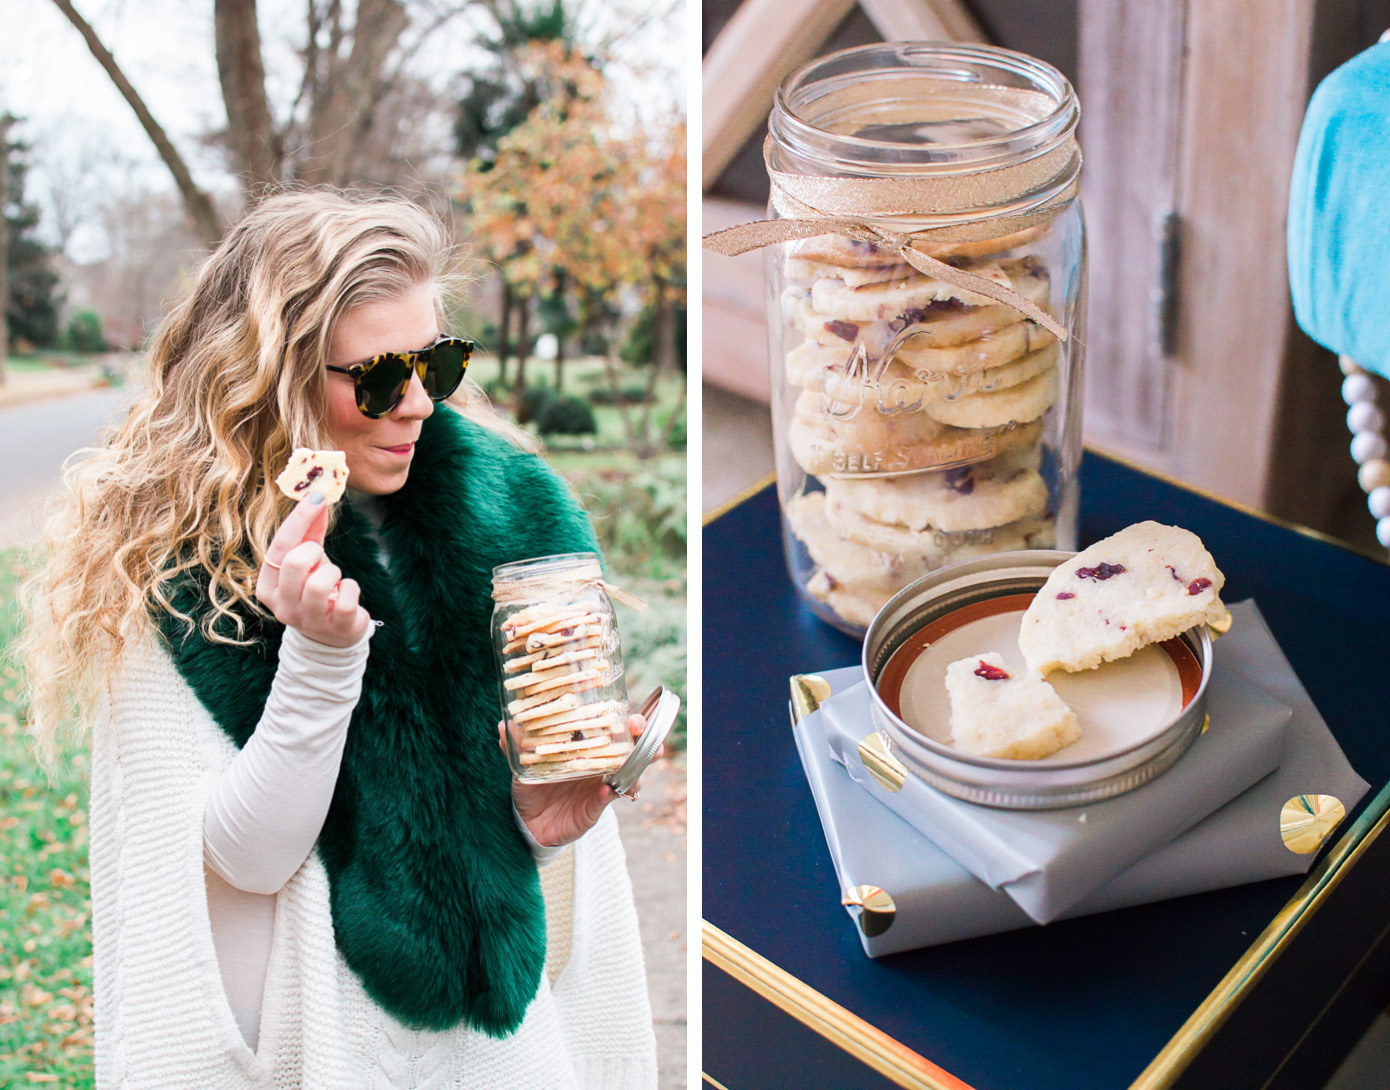 Third Annual Cookie Exchange | Christmas Cookie Recipes | Louella Reese Life & Style Blog